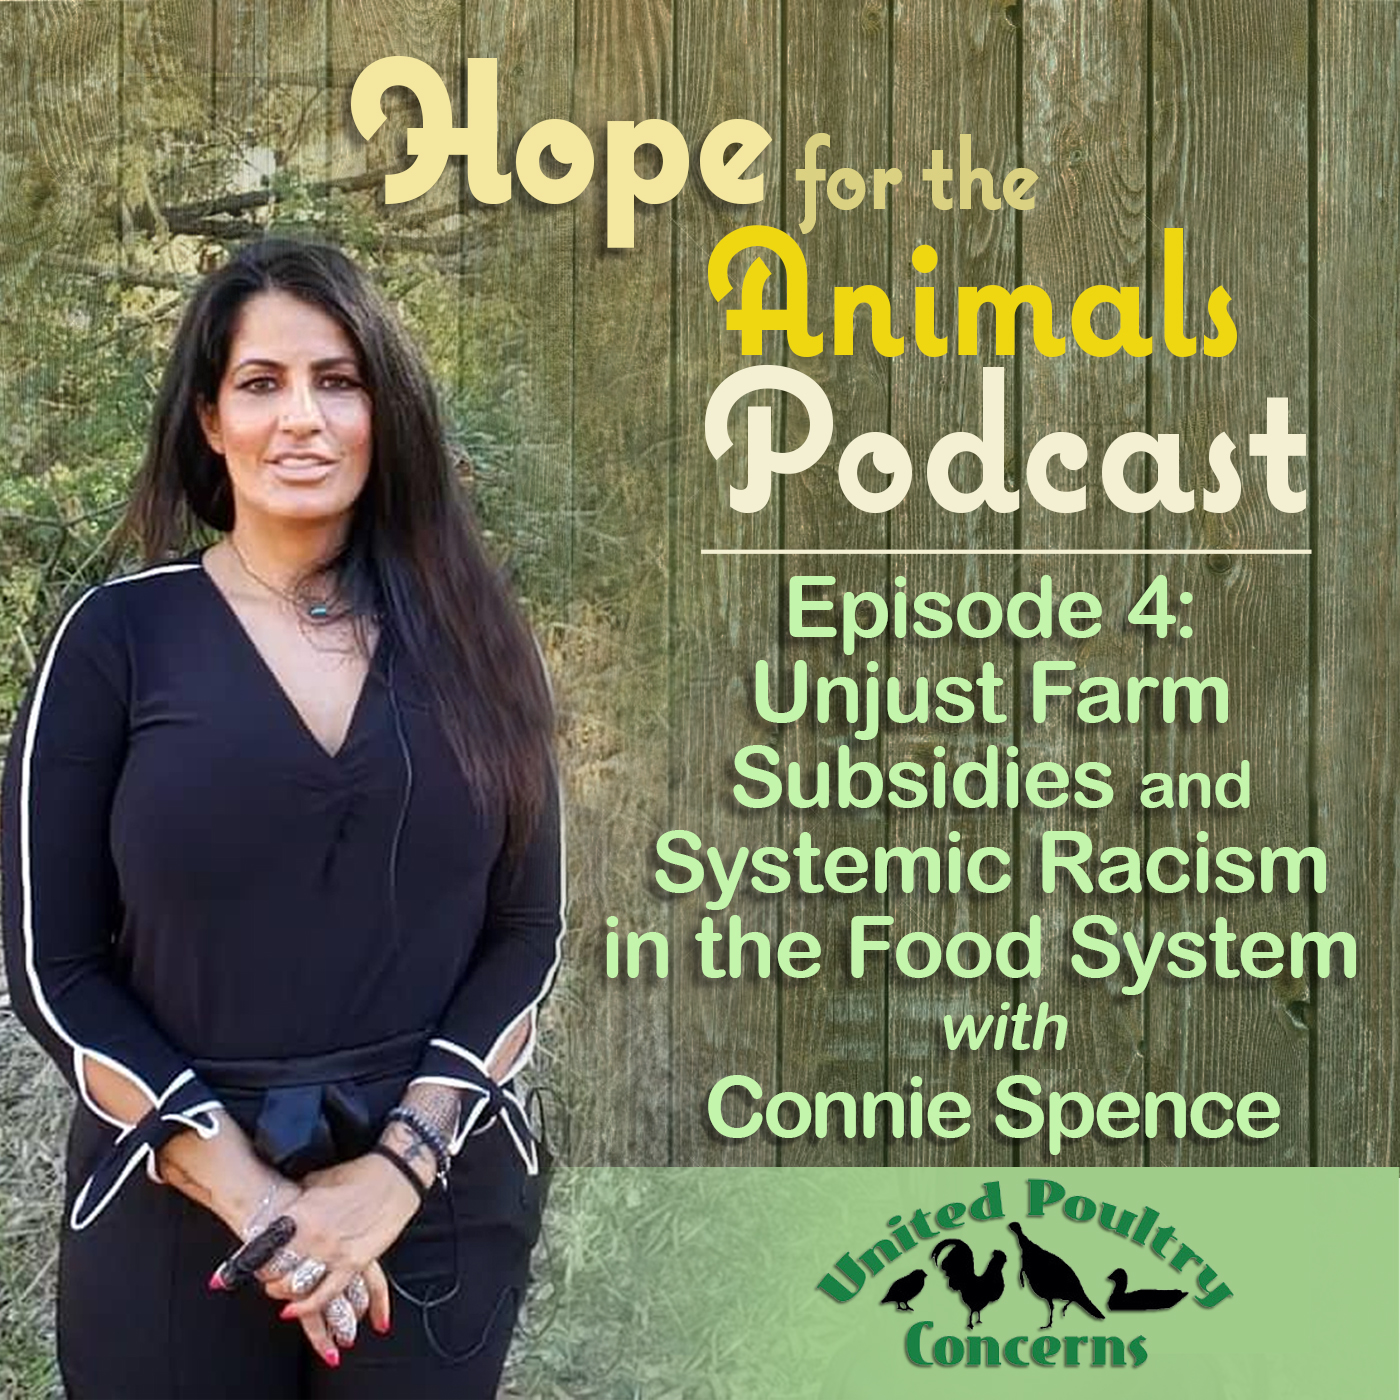 Episode 4: Unjust Farm Subsidies and Systemic Racism in the Food System with Connie Spence